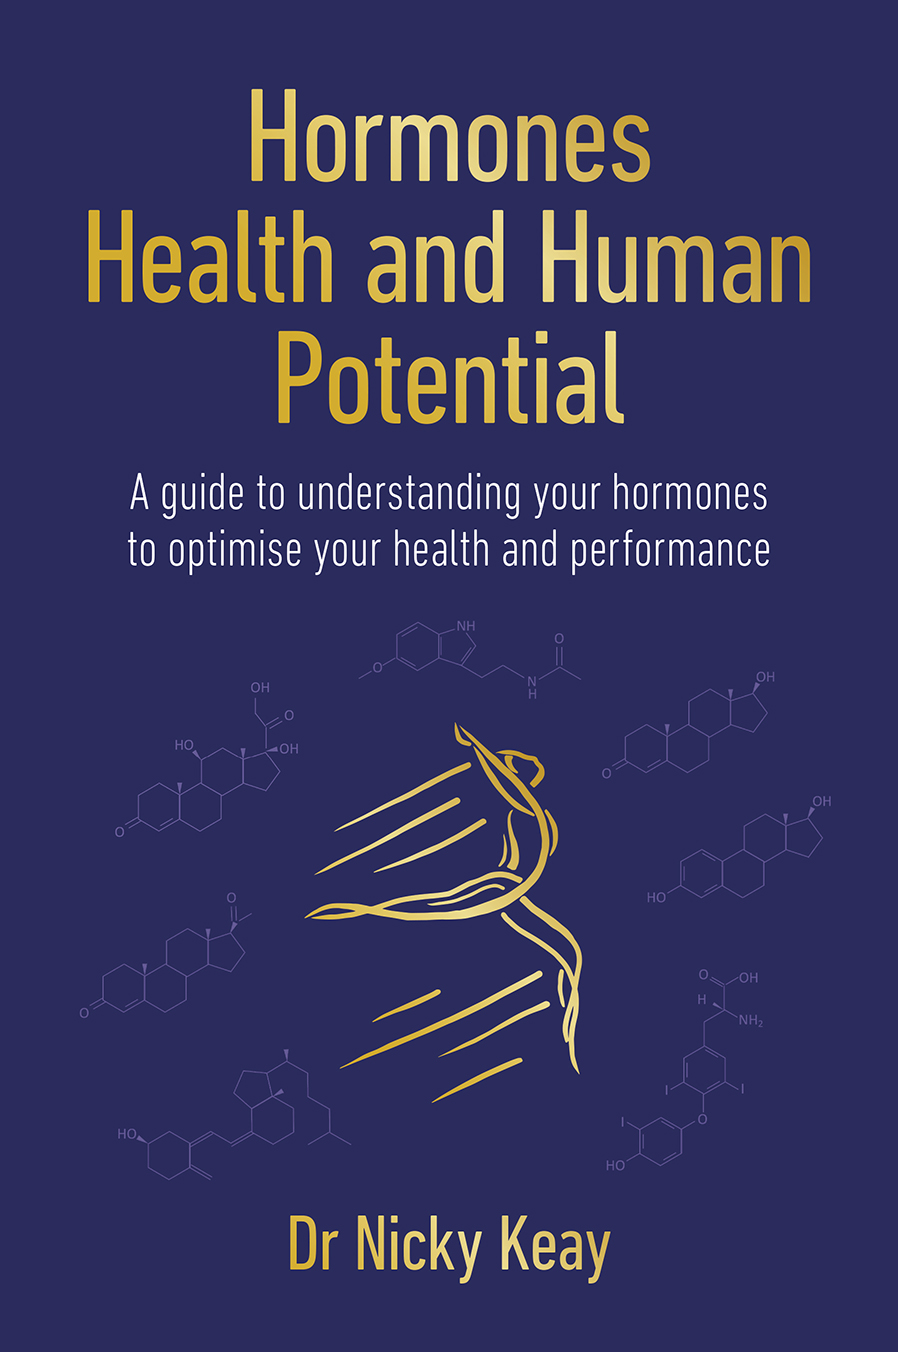 Hormones, Health and Human Potential